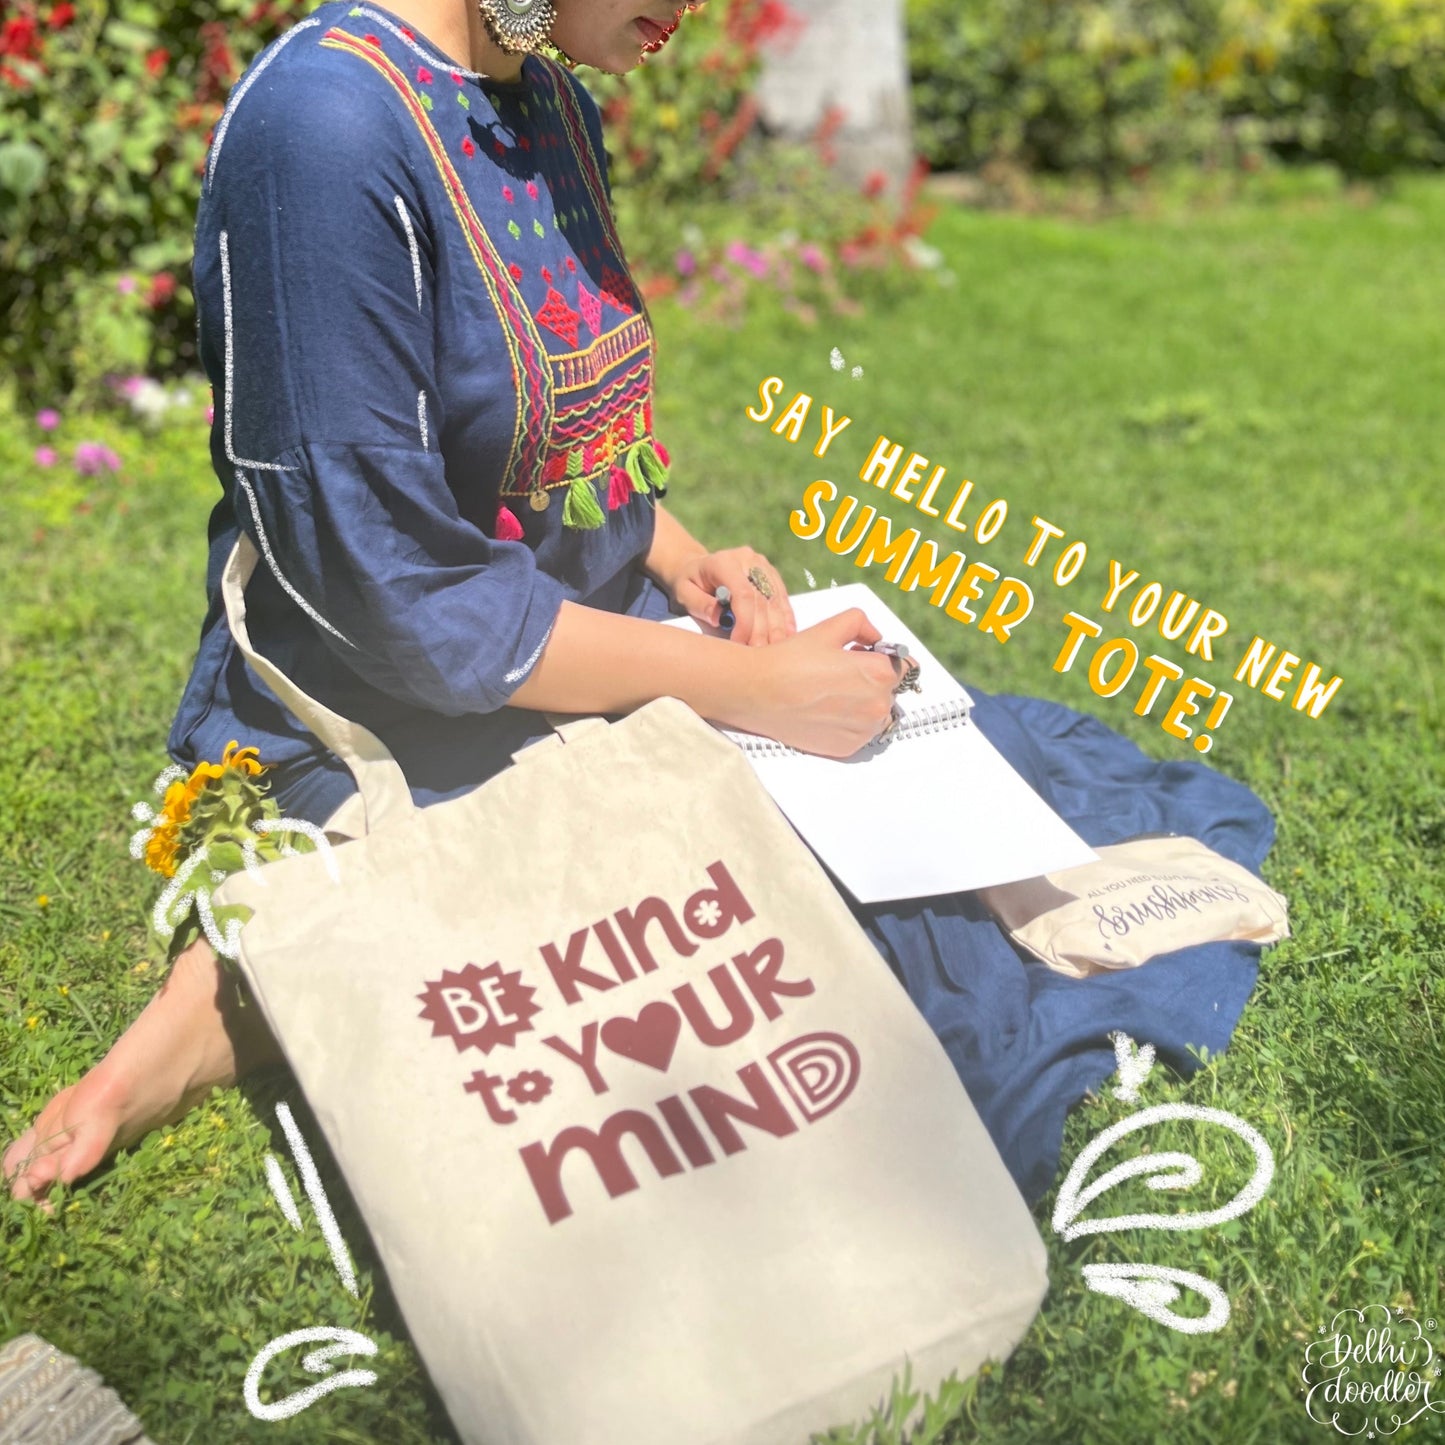 Canvas tote- Be kind to your mind